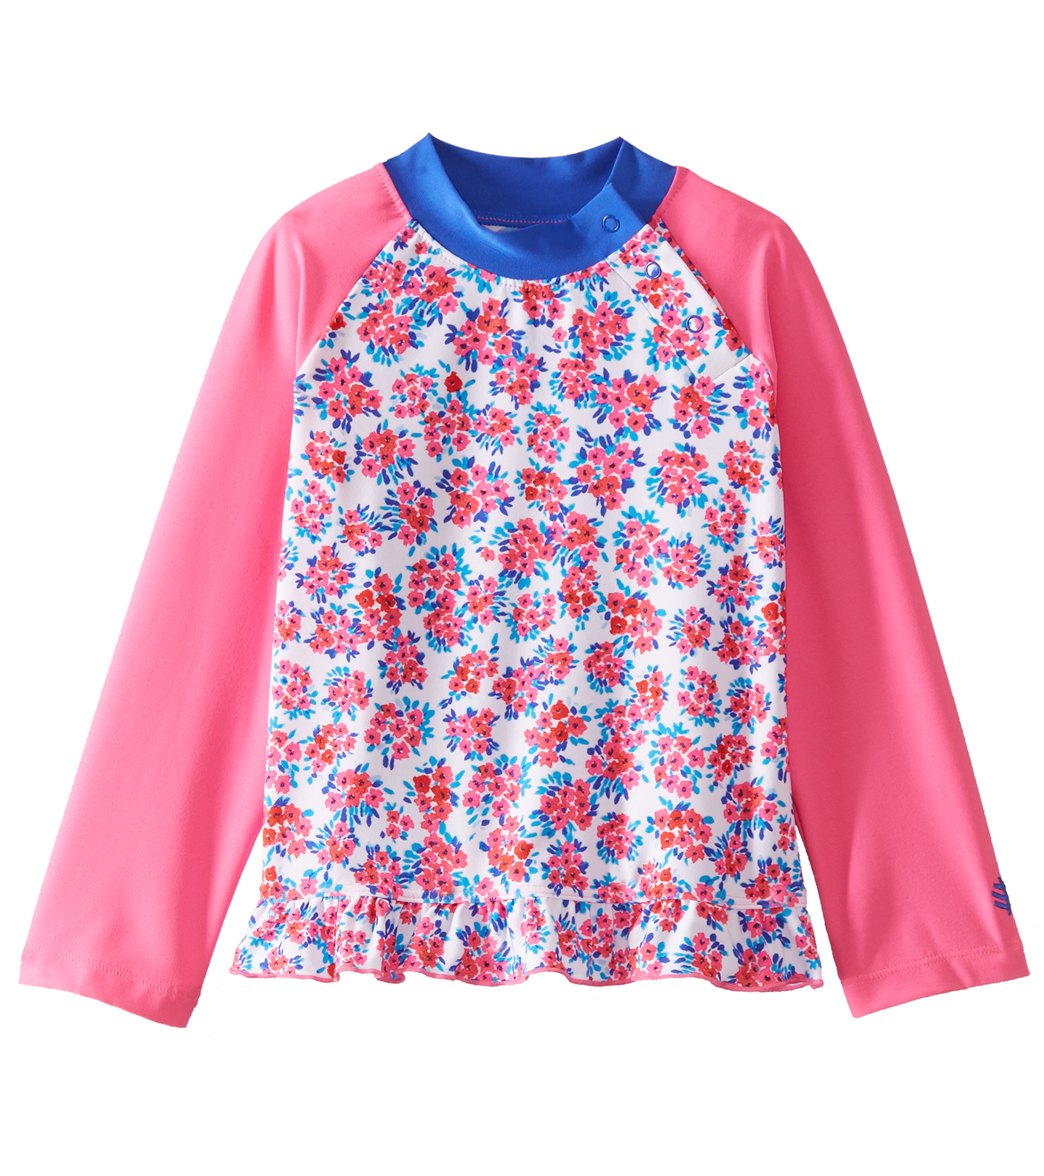 Coolibar Girls' Upf 50+ Ruffle Swim Shirt 6 Months-3T - Watercolor Floral 18-24 Month Size Months Polyester/Spandex - Swimoutlet.com